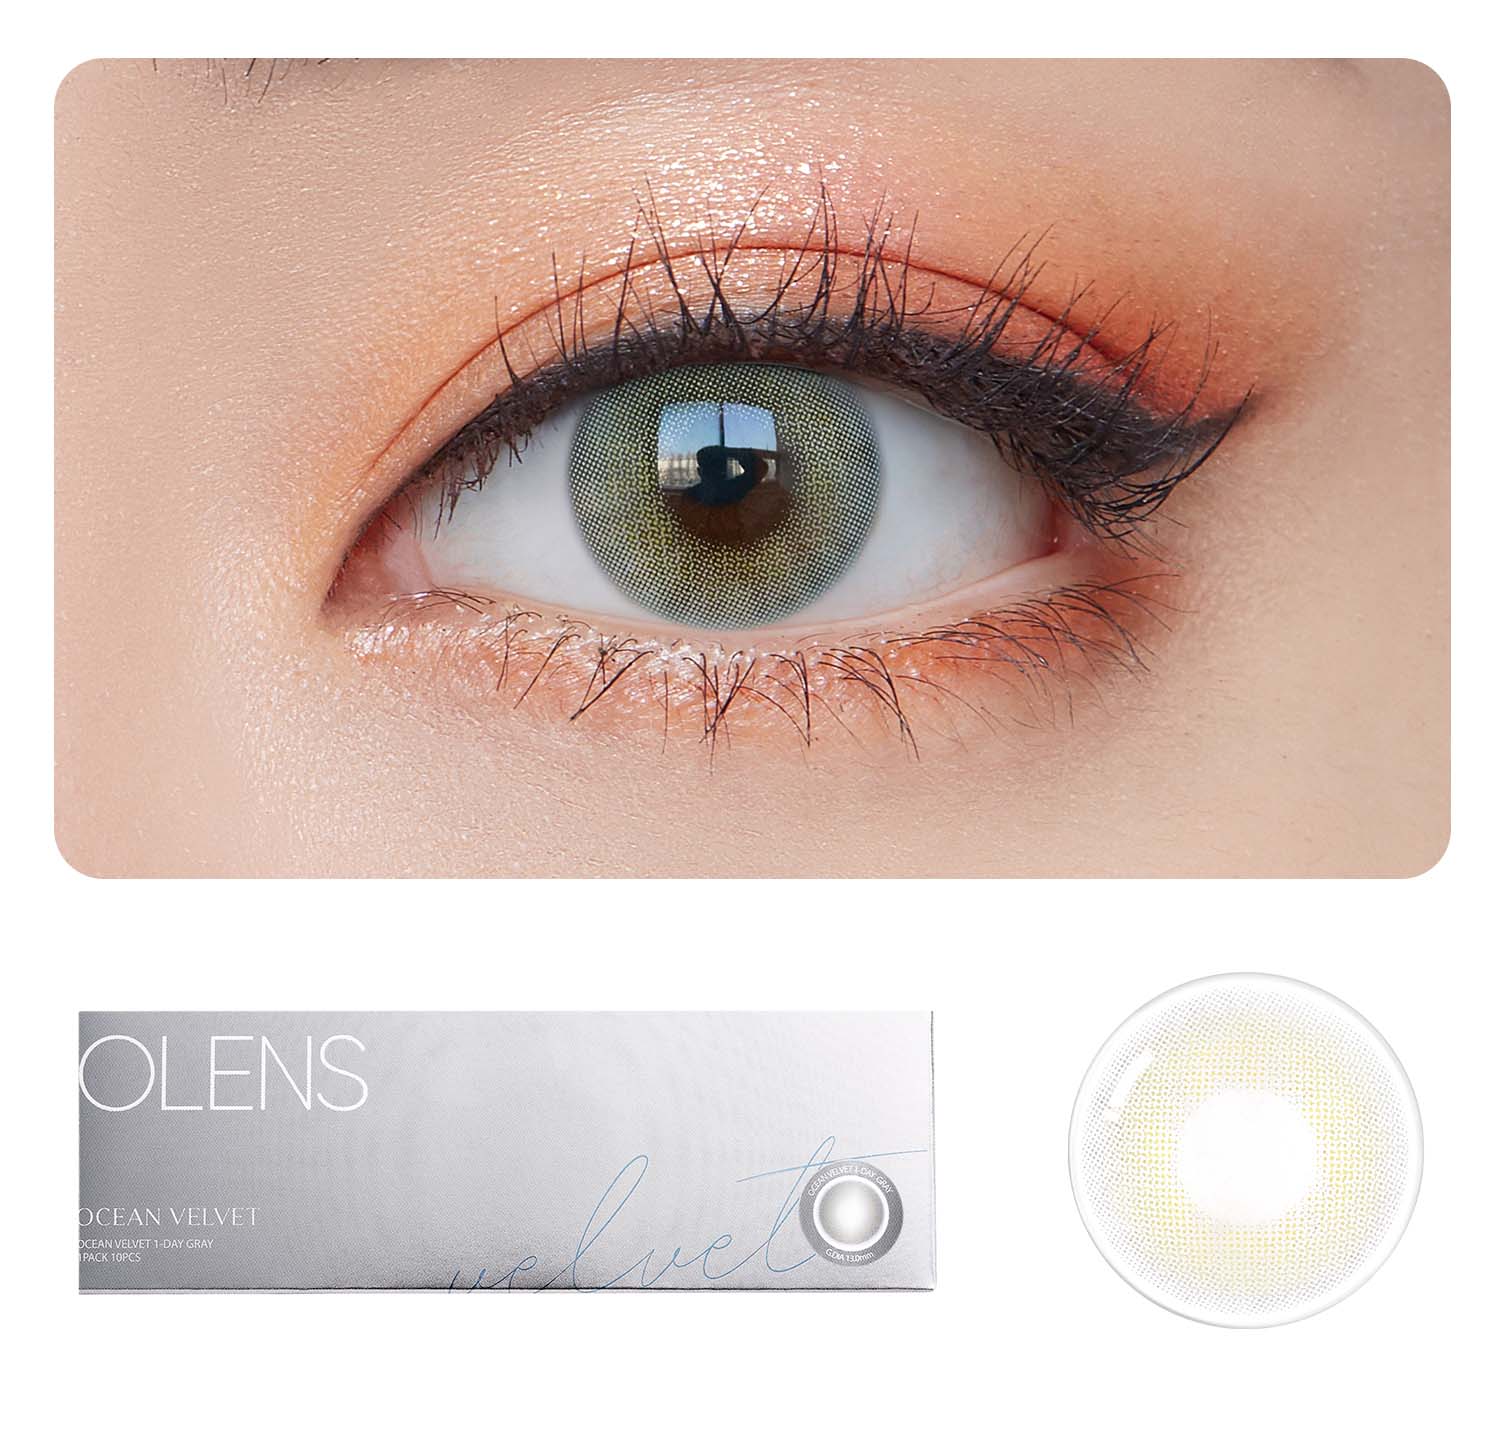  OLENS Premium Color Contact Lens | Ocean Velvet Gray contact lens |Natural looking gray lens, loved by celebrity makeup artists | 1 day disposable trial pack | o-lens.co.in